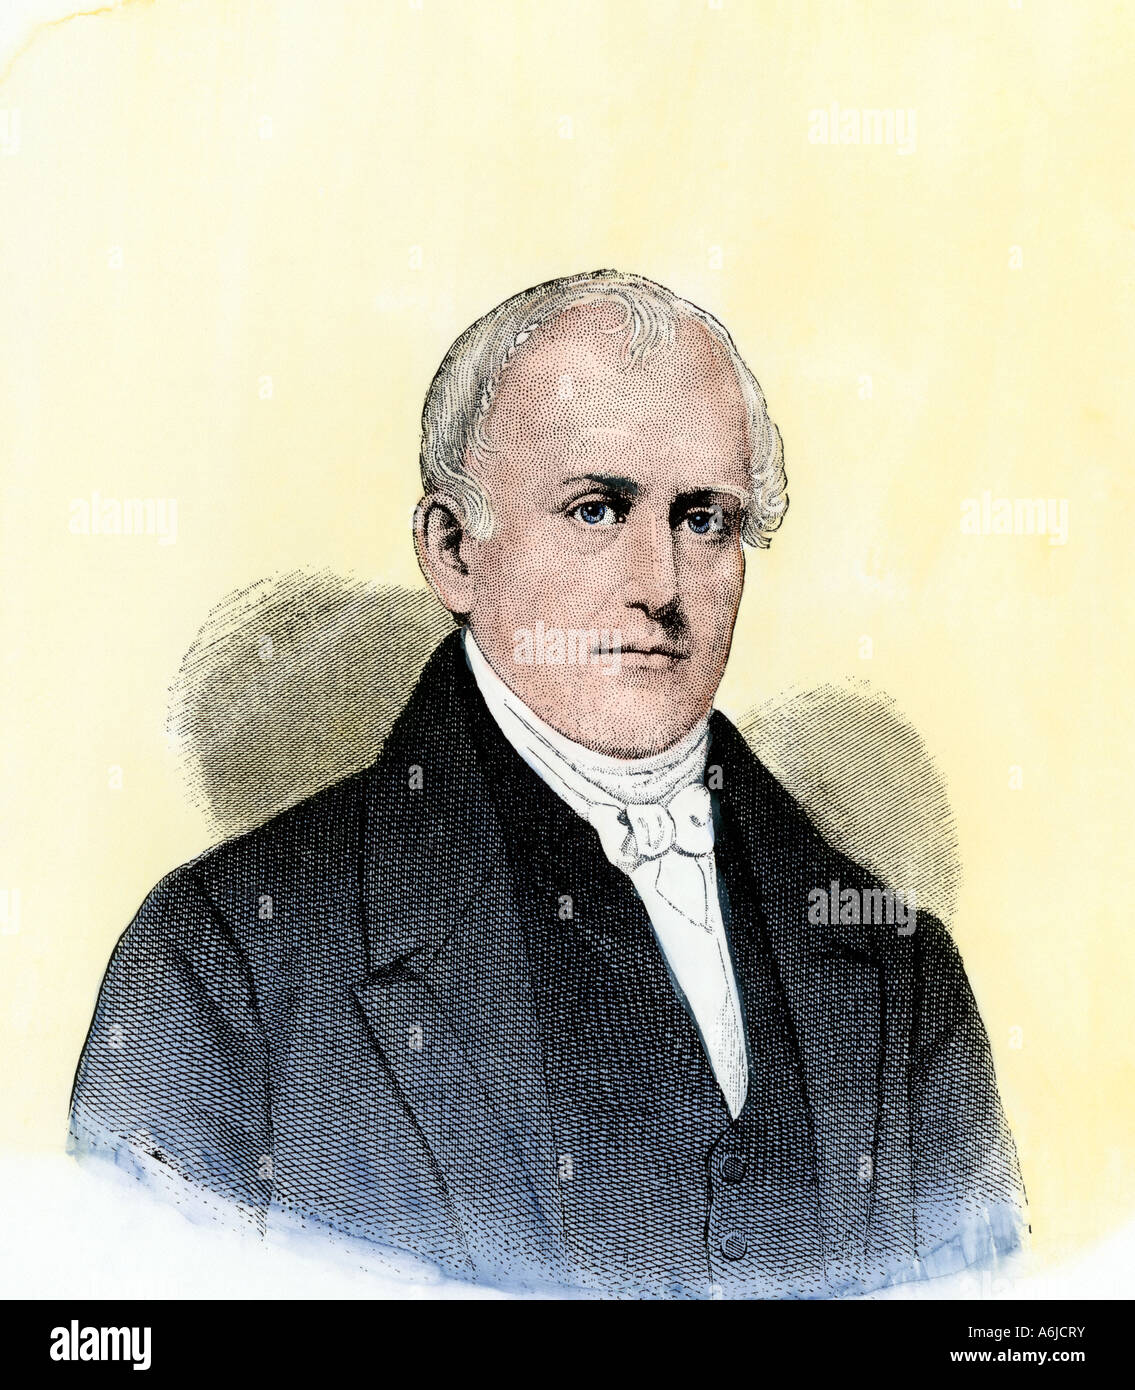 Samuel Slater known as the Father of American Manufacturing. Hand-colored halftone of an illustration Stock Photo